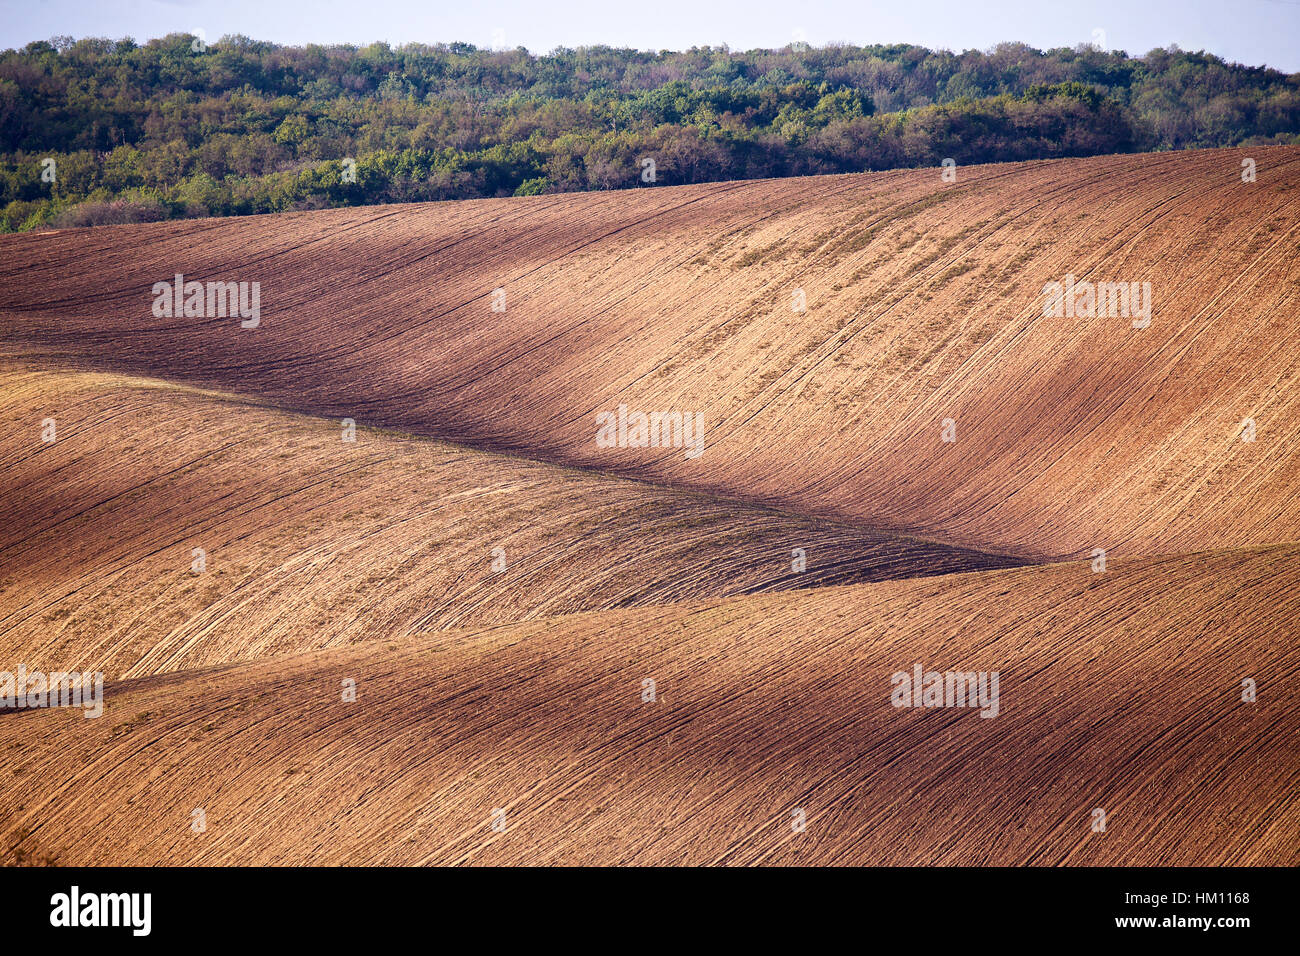 Spring arable land. Spring wavy agriculture scene. Rural landscape of South Moravia Stock Photo